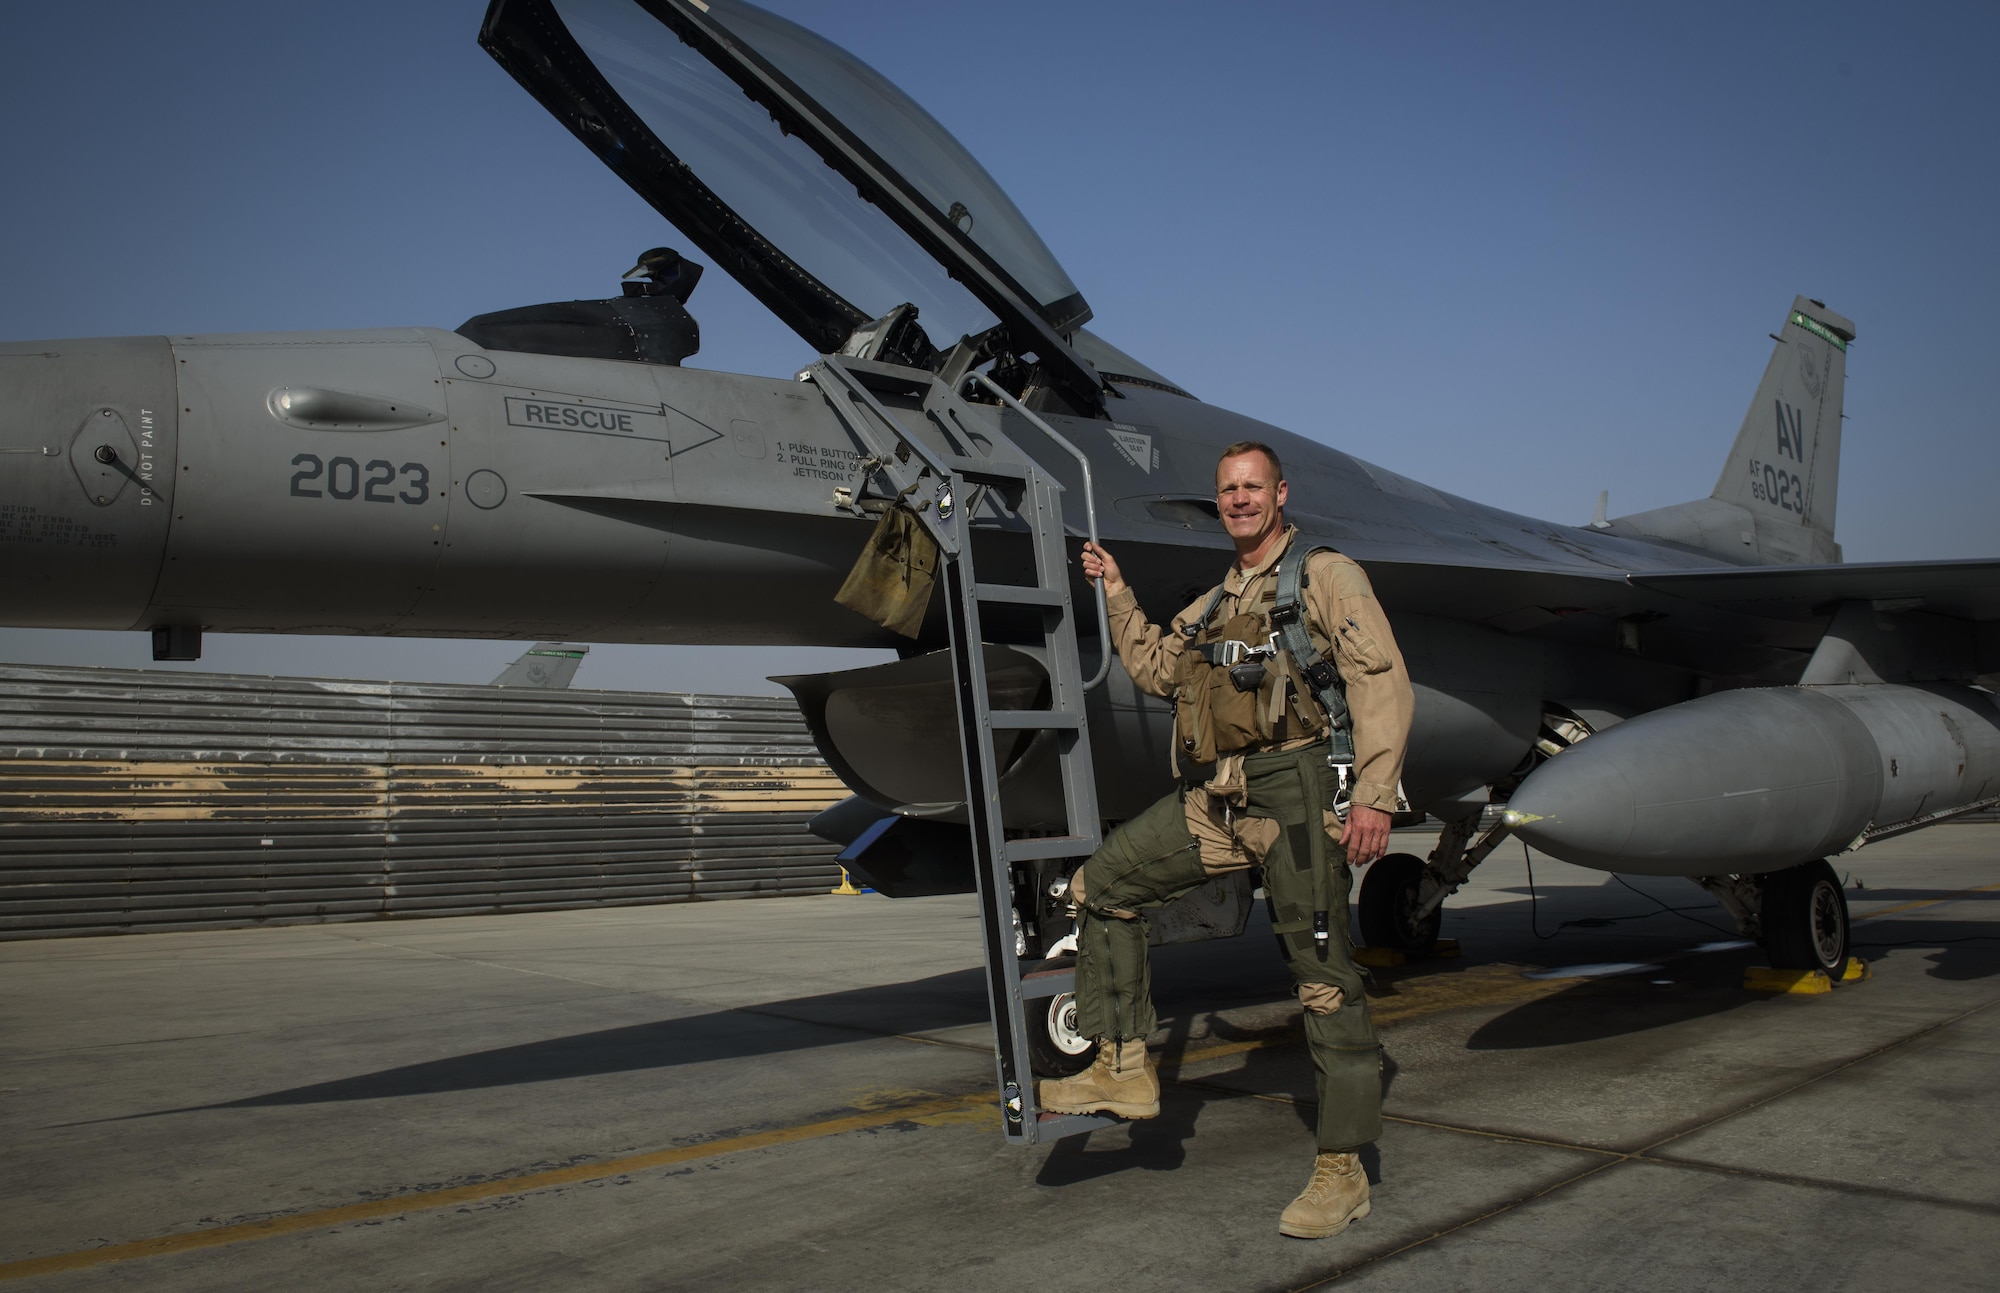 Brig. Gen. Jim Sears conducted his fini flight out of Bagram Airfield, Afghanistan, May 22, 2017. Sears, 455th Air Expeditionary Wing commander, is a command pilot with more than 3,200 flying hours, including combat missions over Iraq and Afghanistan. (U.S. Air Force photo by Staff Sgt. Benjamin Gonsier)